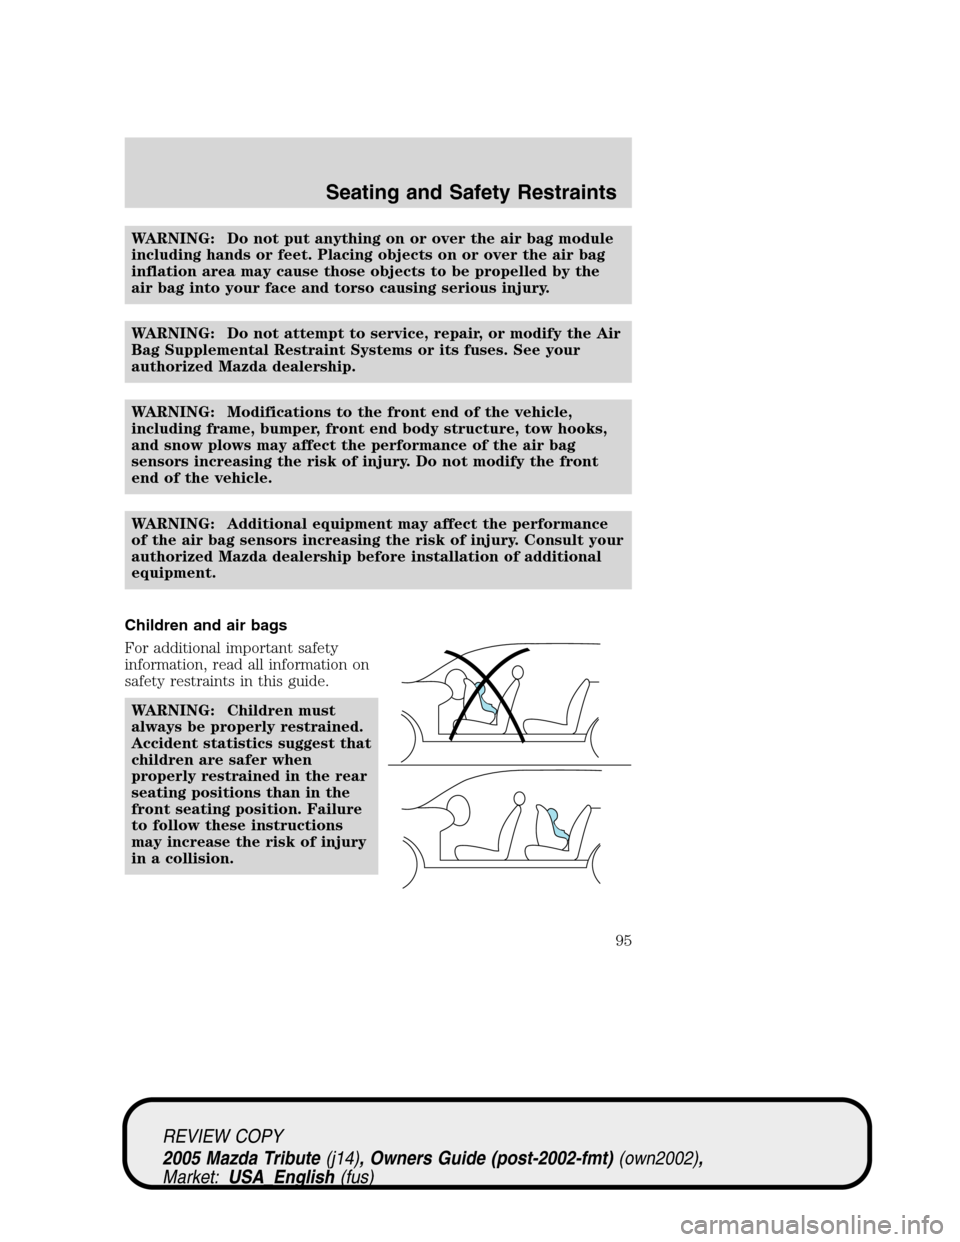 MAZDA MODEL TRIBUTE 2005  Owners Manual (in English) WARNING: Do not put anything on or over the air bag module
including hands or feet. Placing objects on or over the air bag
inflation area may cause those objects to be propelled by the
air bag into yo